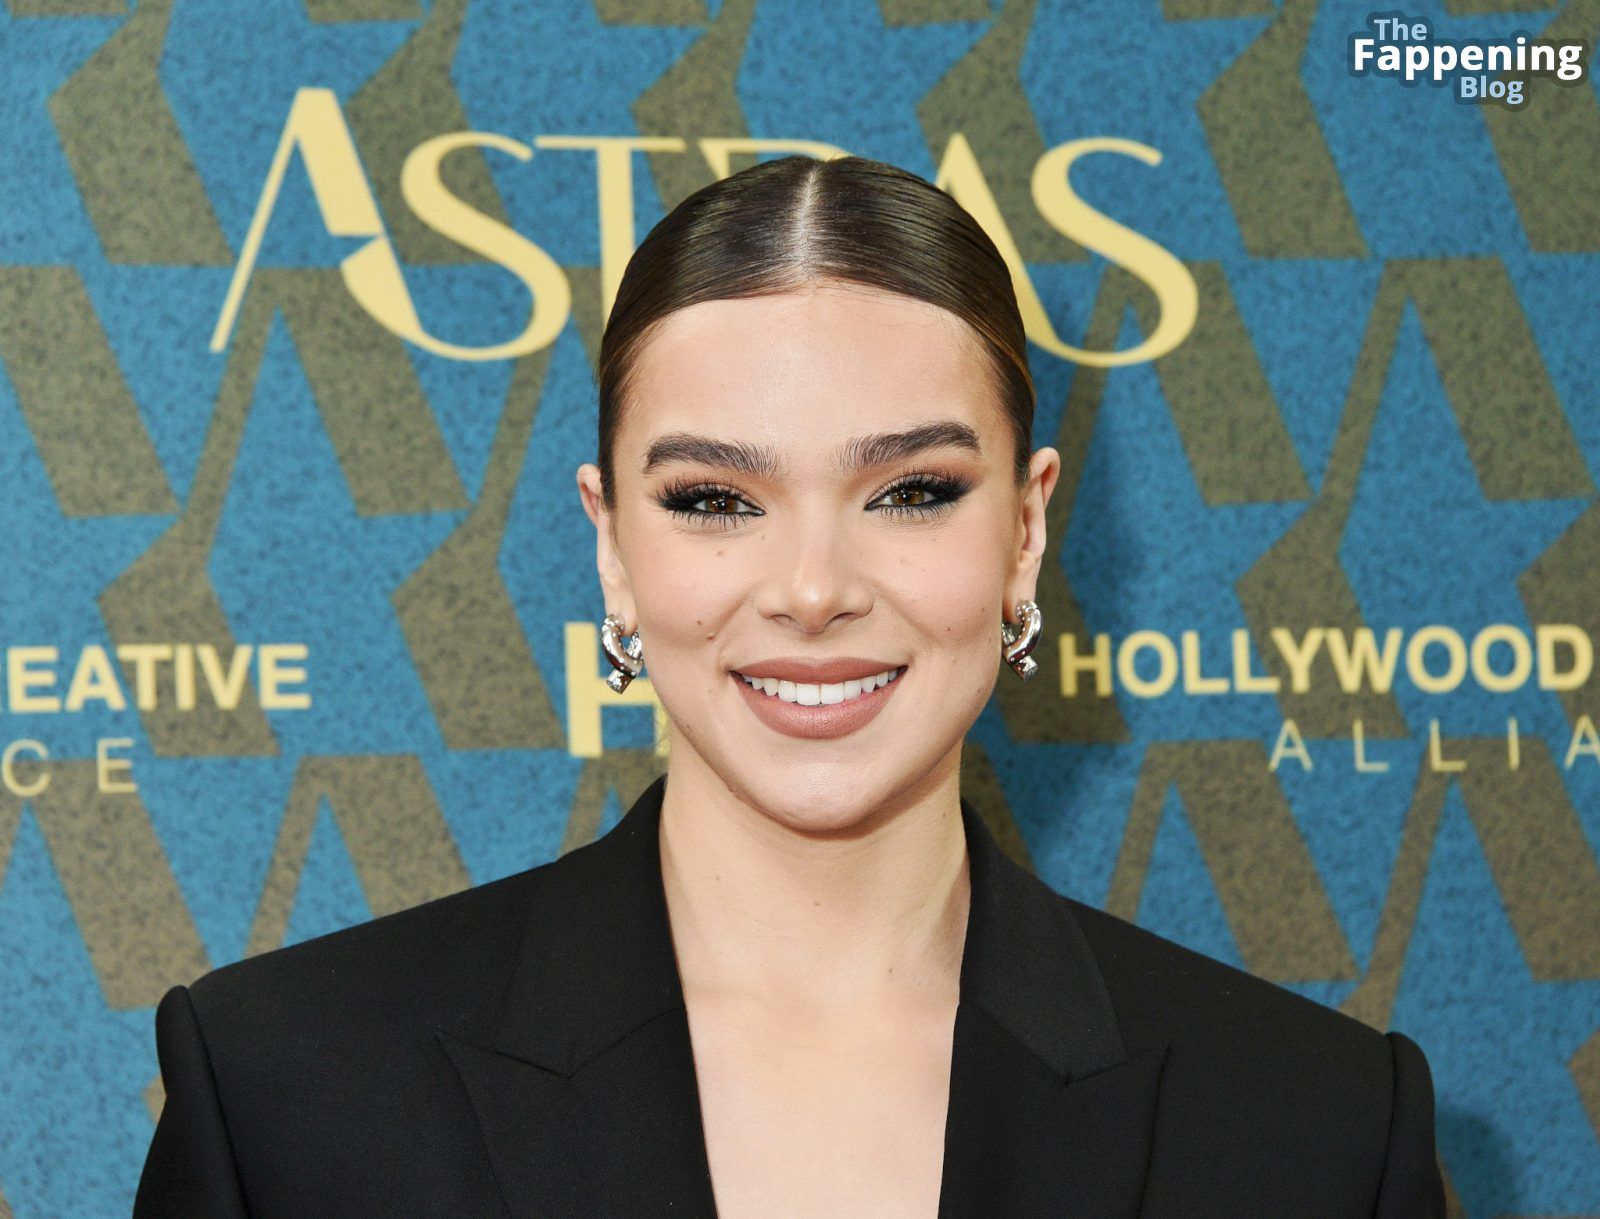 Hailee-Steinfeld-Black-Outfit-Astra-Film-Awards-24-thefappeningblog.com_.jpg